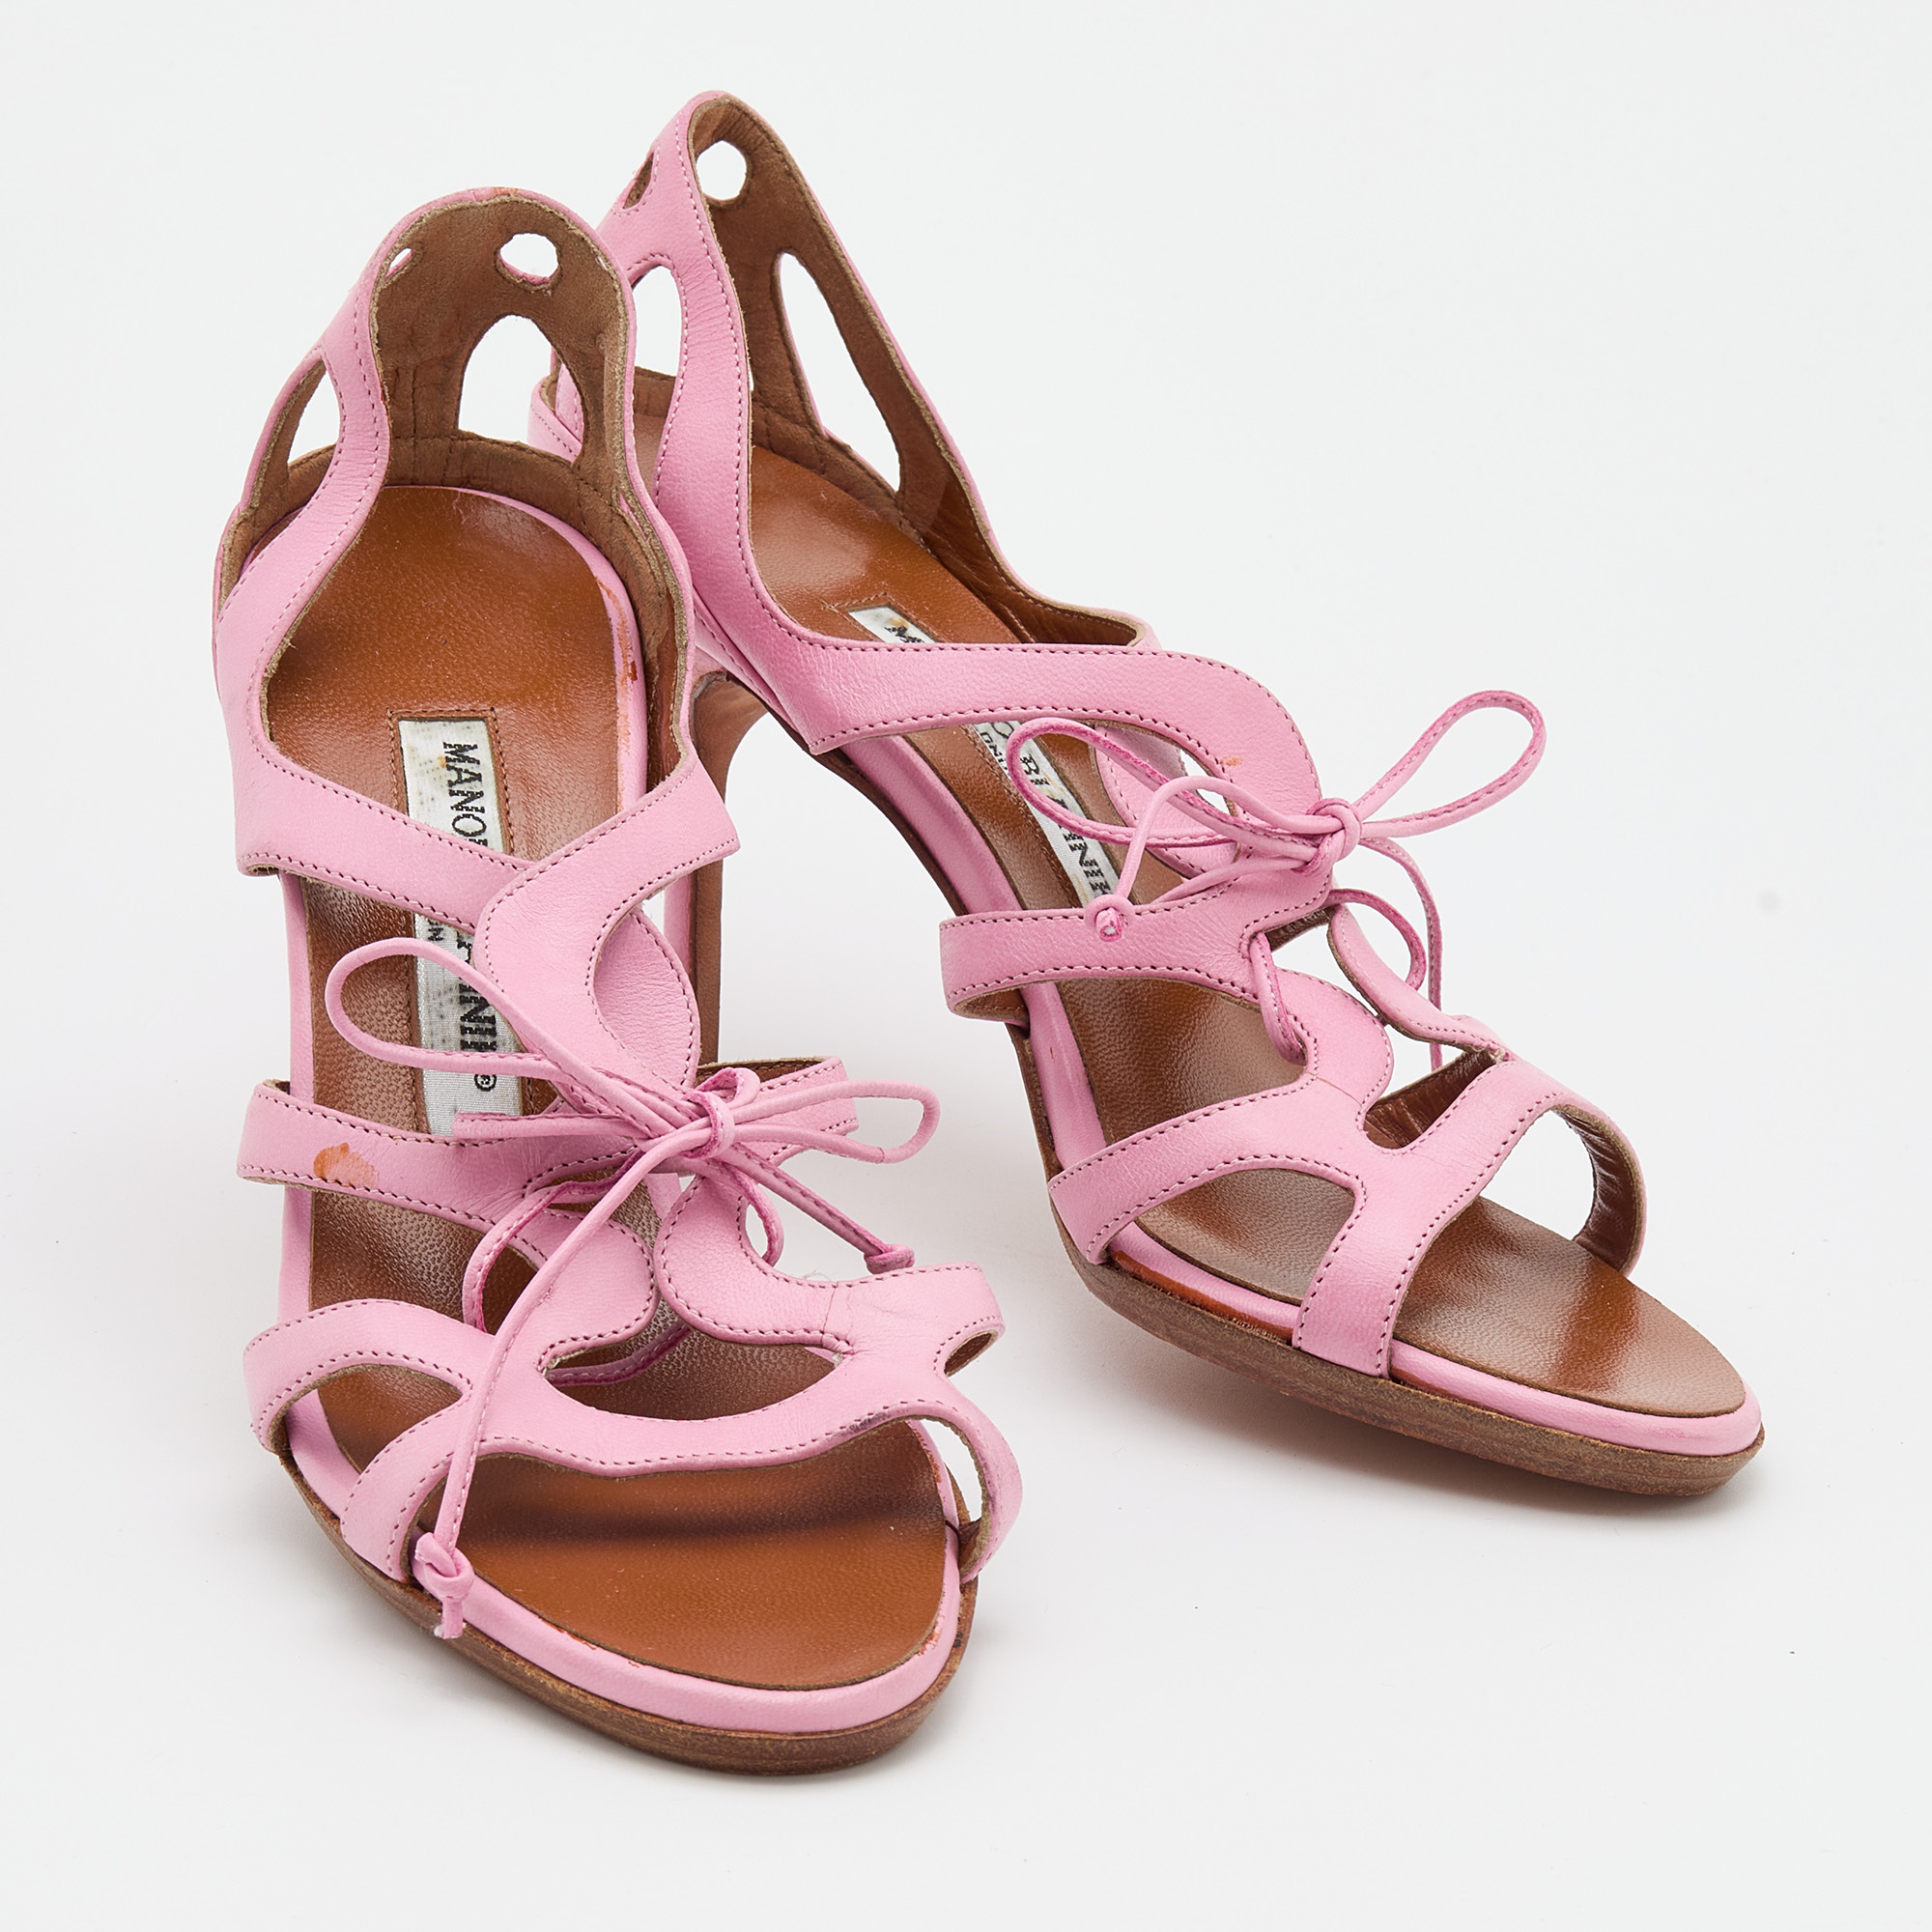 Manolo Blahnik Pink Leather Strappy Ankle Tie Sandals Size 36.5